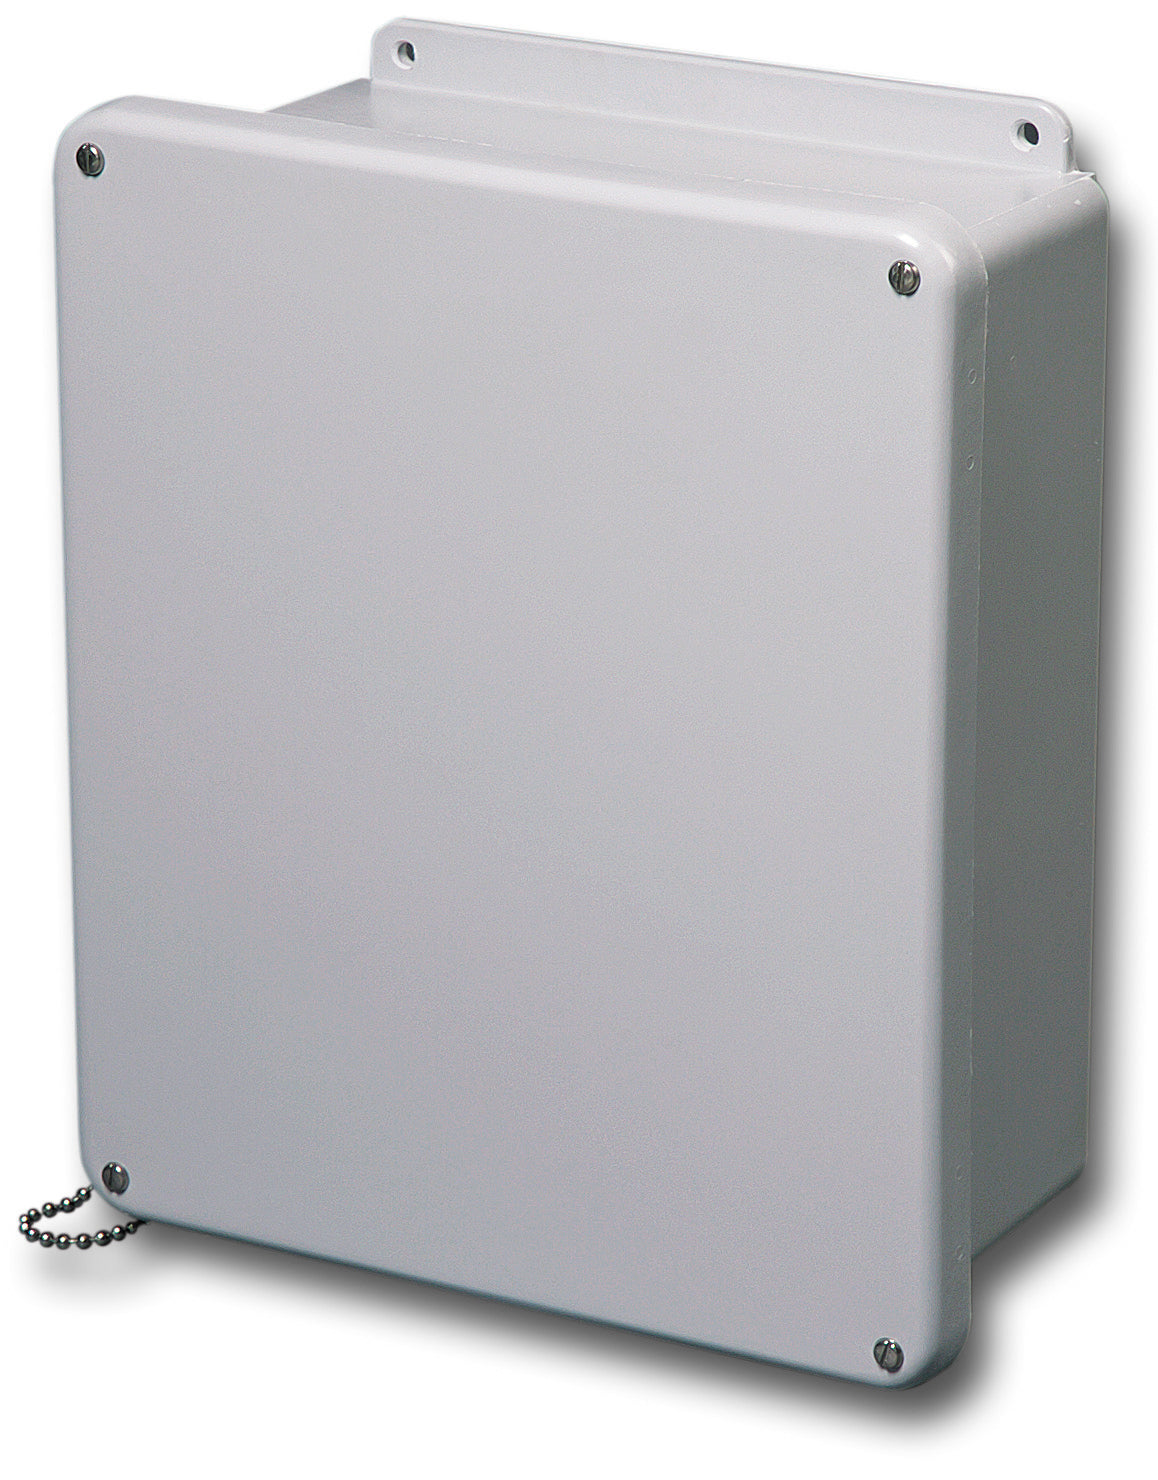 N4X   FG   SC Series     Fiberglass Enclosures with Lift   Off Screw Cover and Stainless Steel Cover Screws     Includes Cover Chain-1